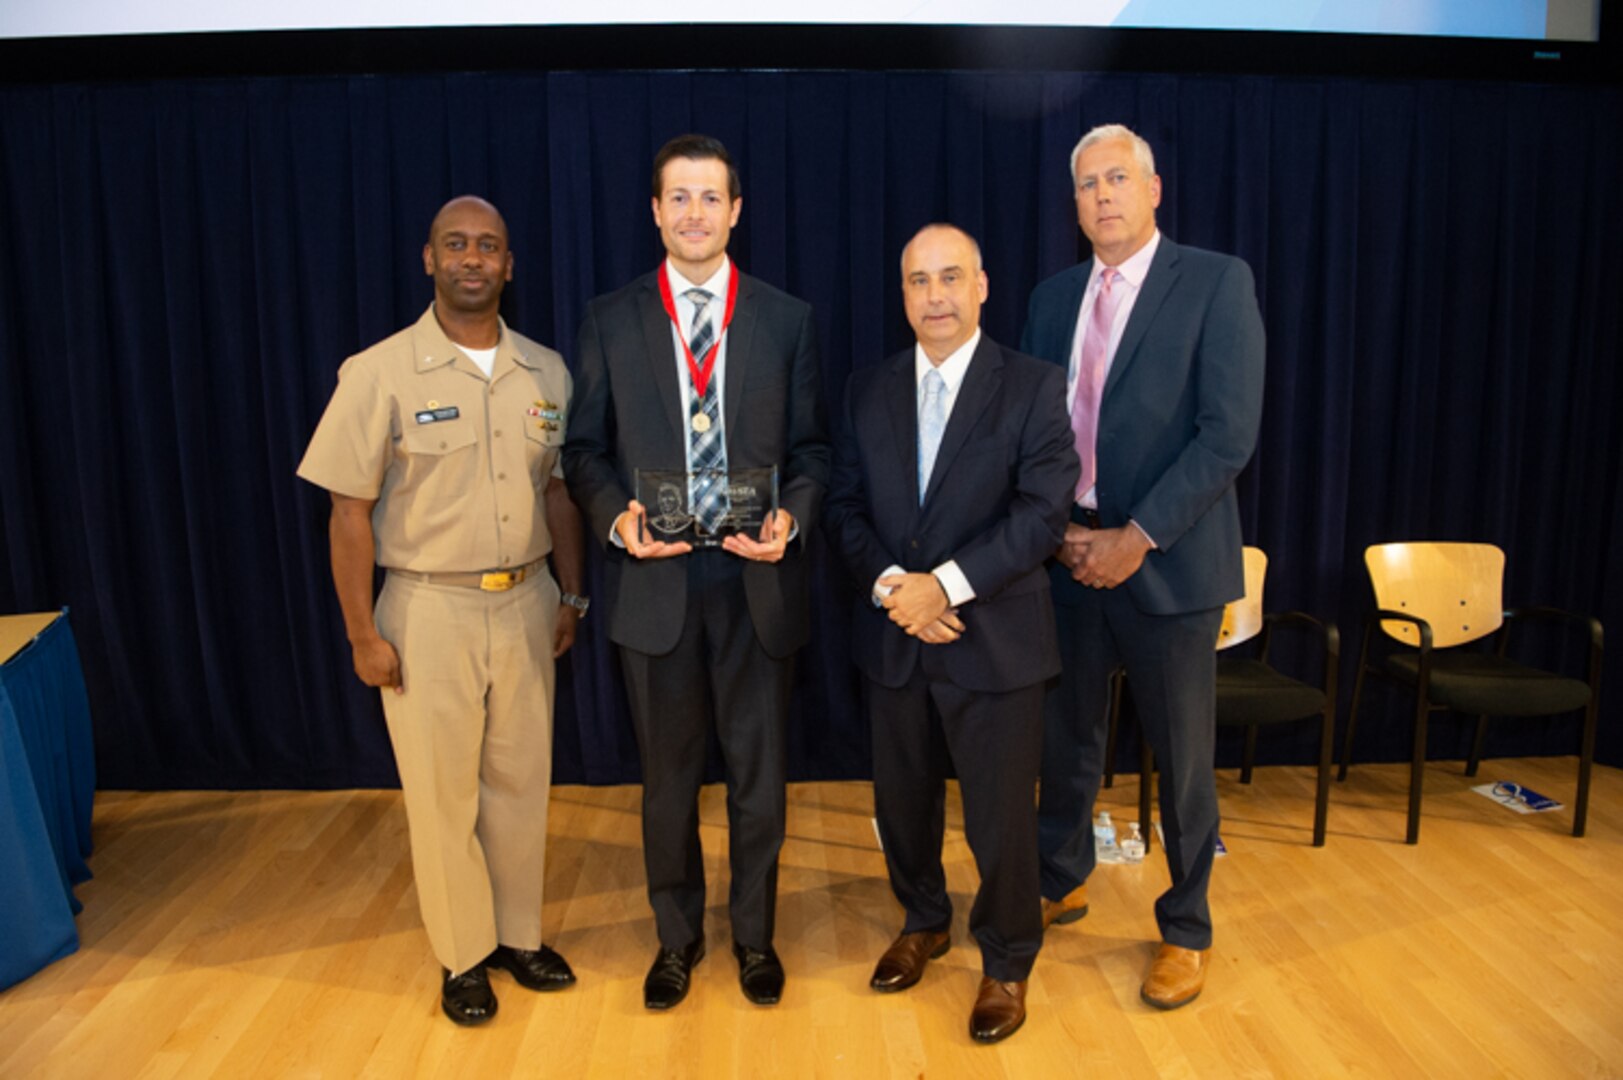 Bradley Schafer, head of the Columbia-class Submarine Management Branch, receives the Capt. Harold Saunders Award the Naval Surface Warfare Center, Carderock Division Honor Awards on Sept. 10, 2019, in West Bethesda, Md. With Schafer is Commanding Officer Capt. Cedric McNeal, Technical Director Larry Tarasek and Naval Architecture and Engineering Department Head Mike Brown. (U.S. Navy photo by Nicholas Brezzell/Released)